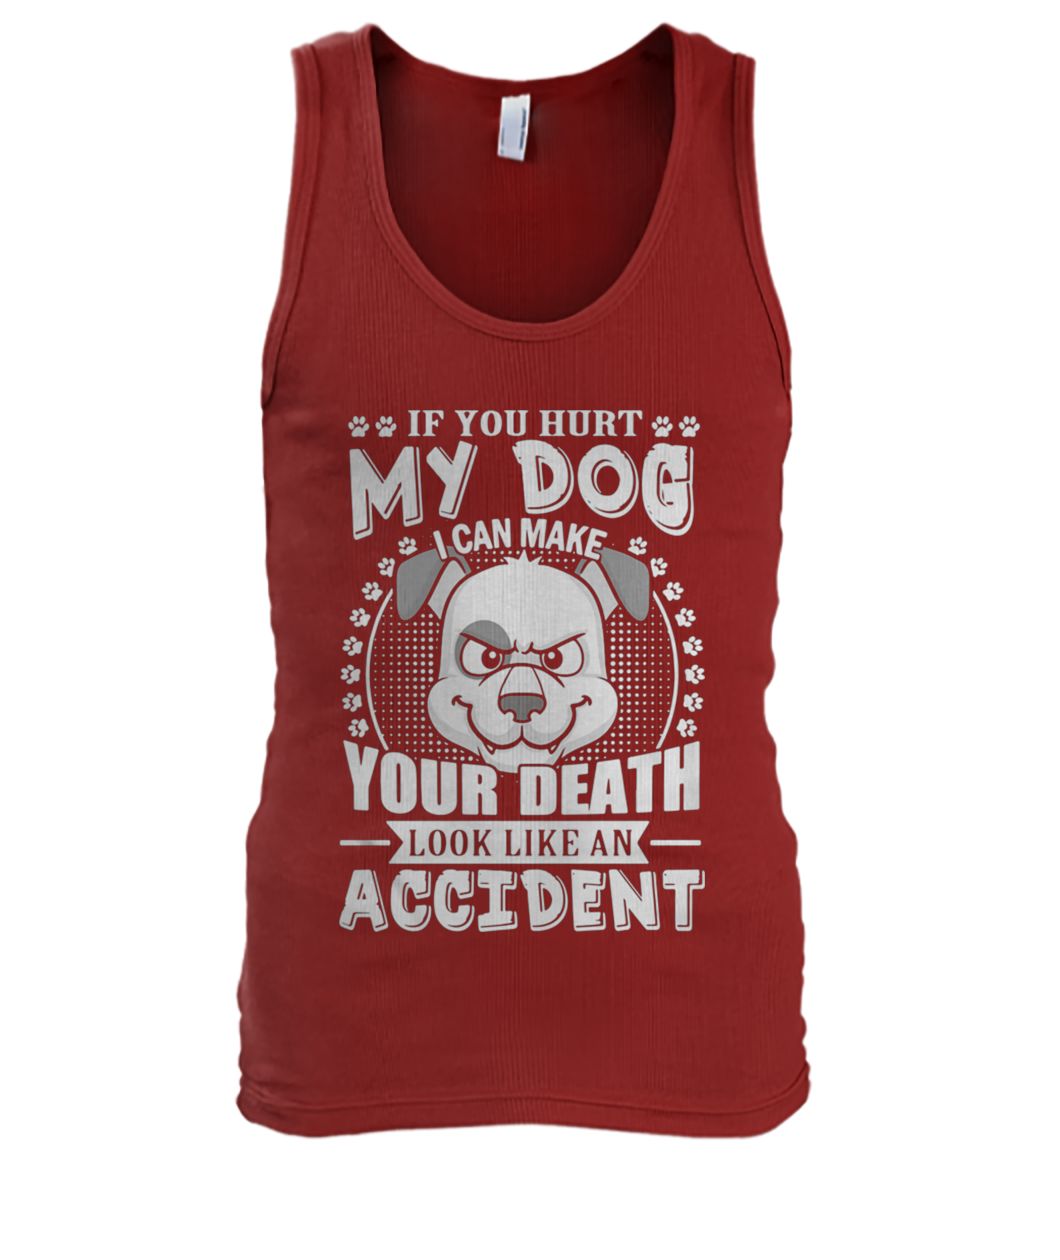 If you hurt my dog I can make your death look like an accident men's tank top